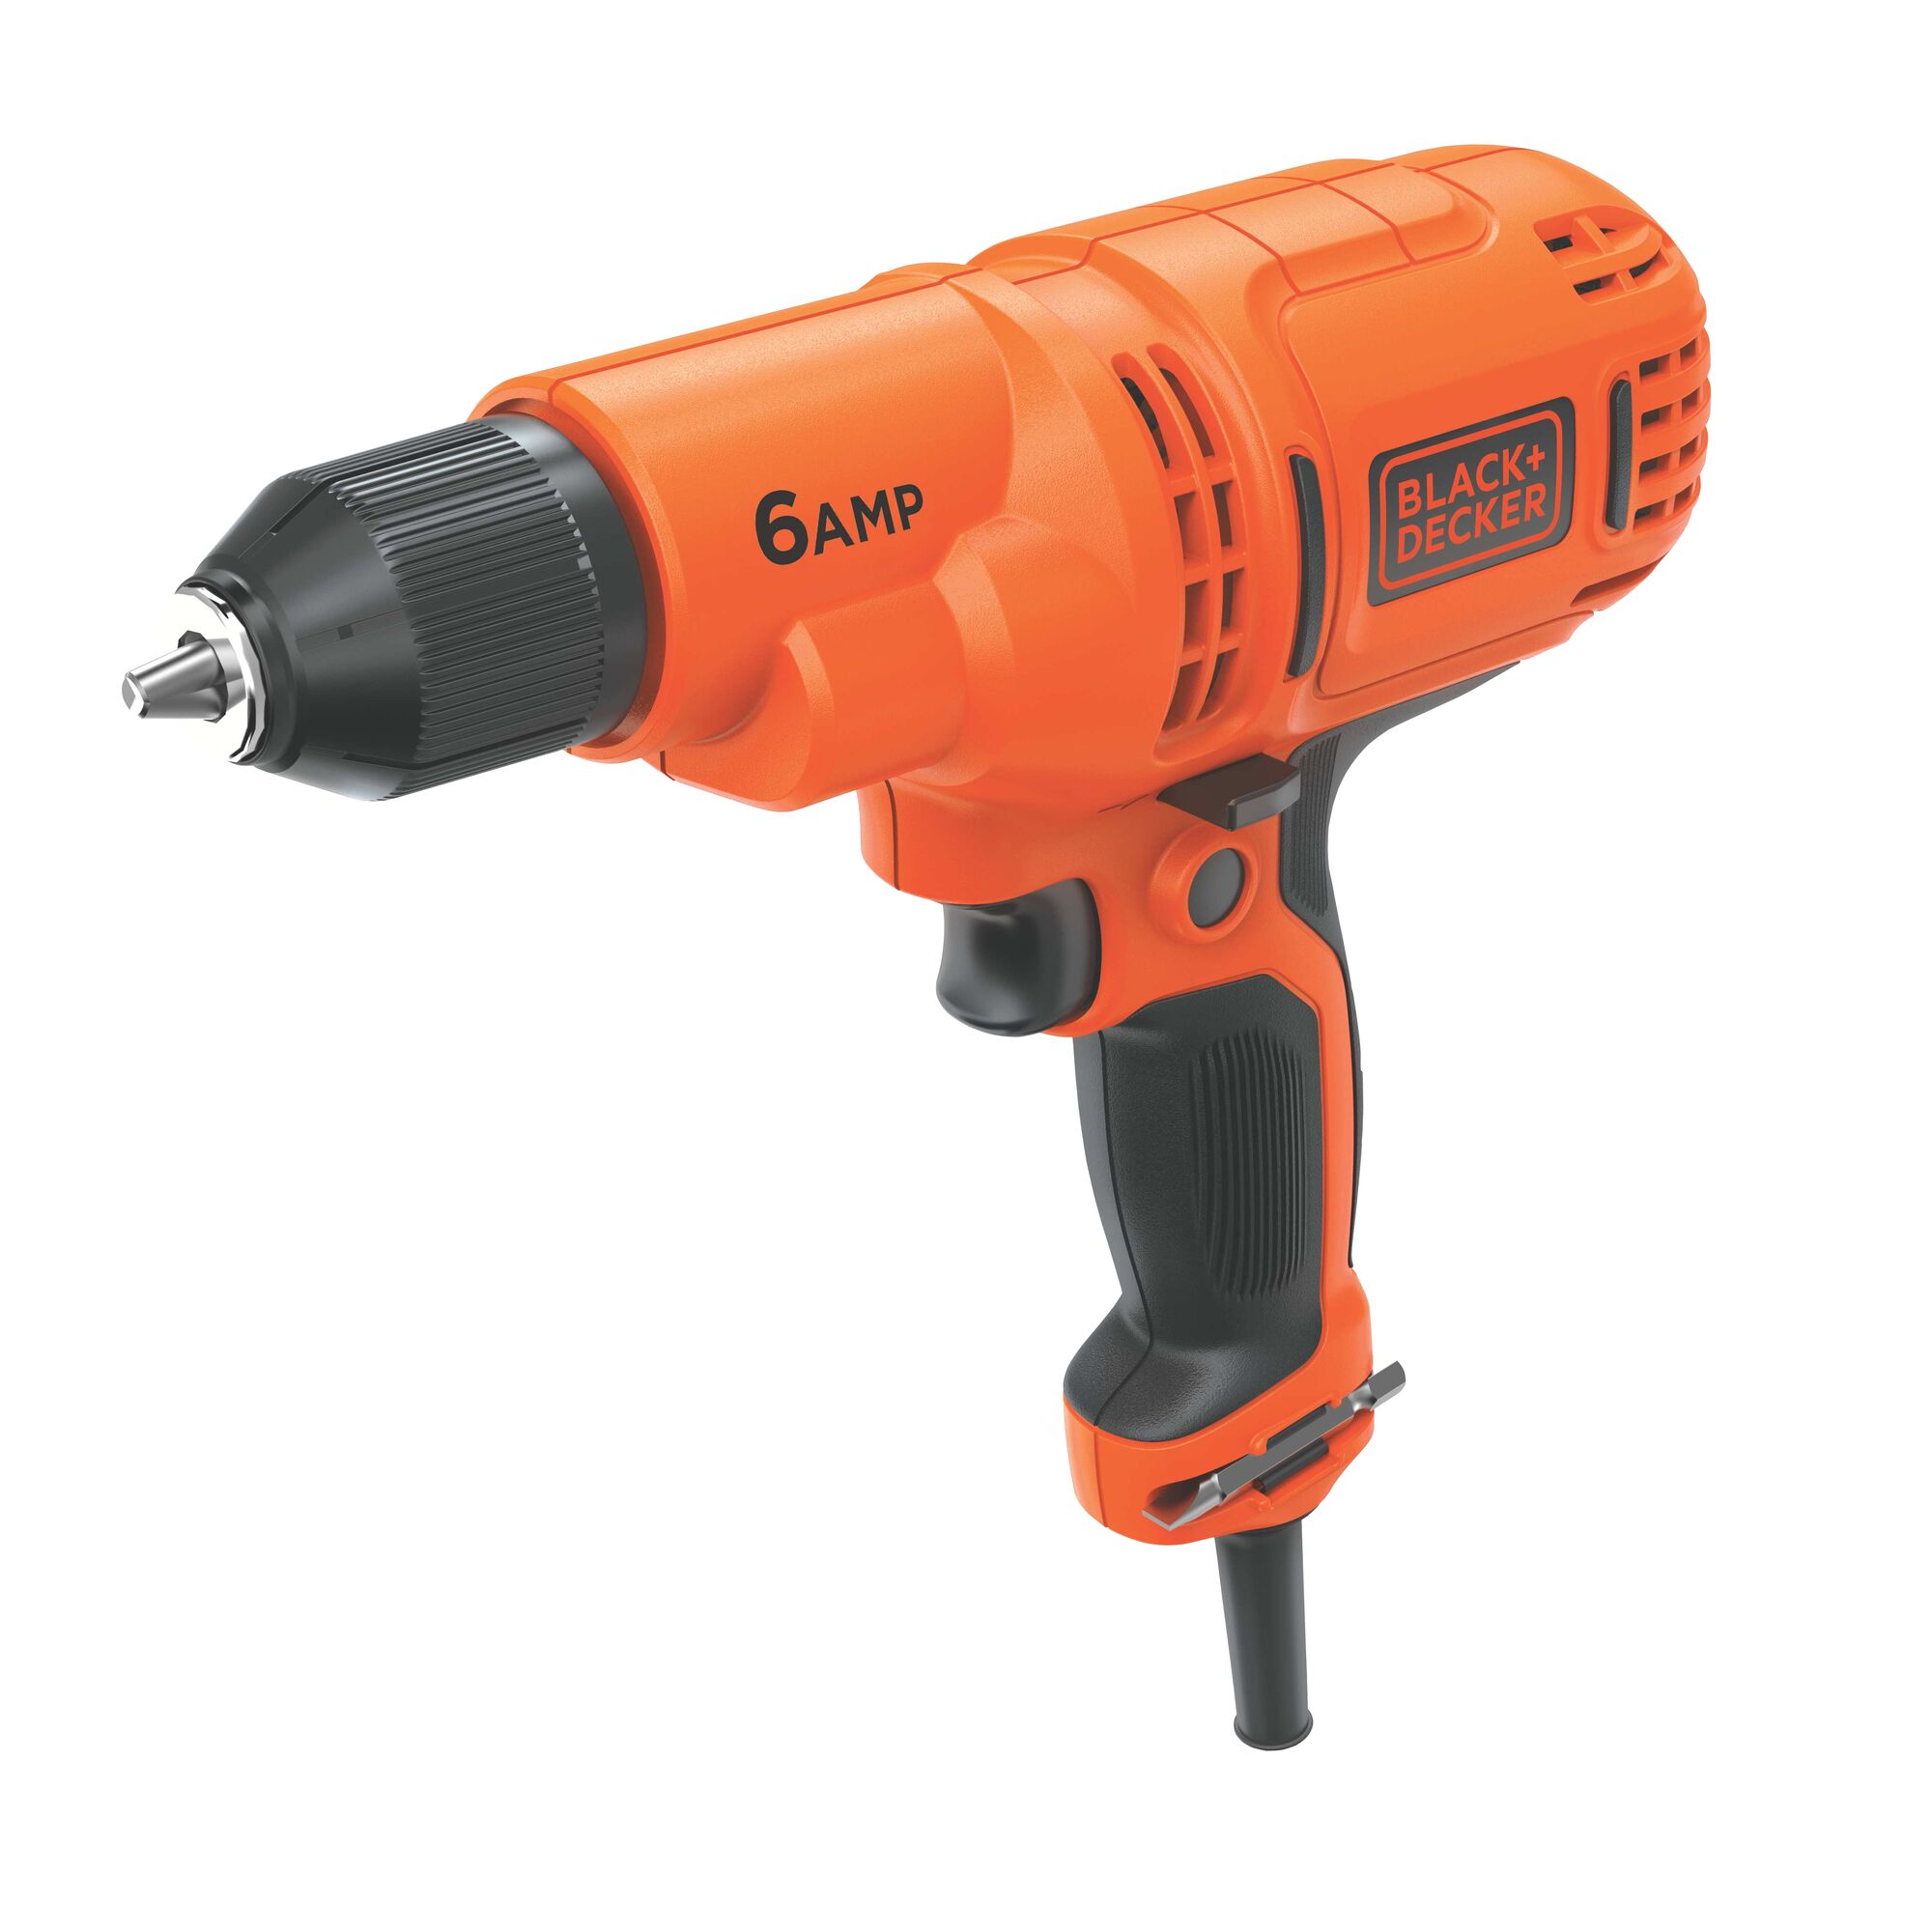 Profile of black and decker 6 amp 3 eighths inch drill driver.